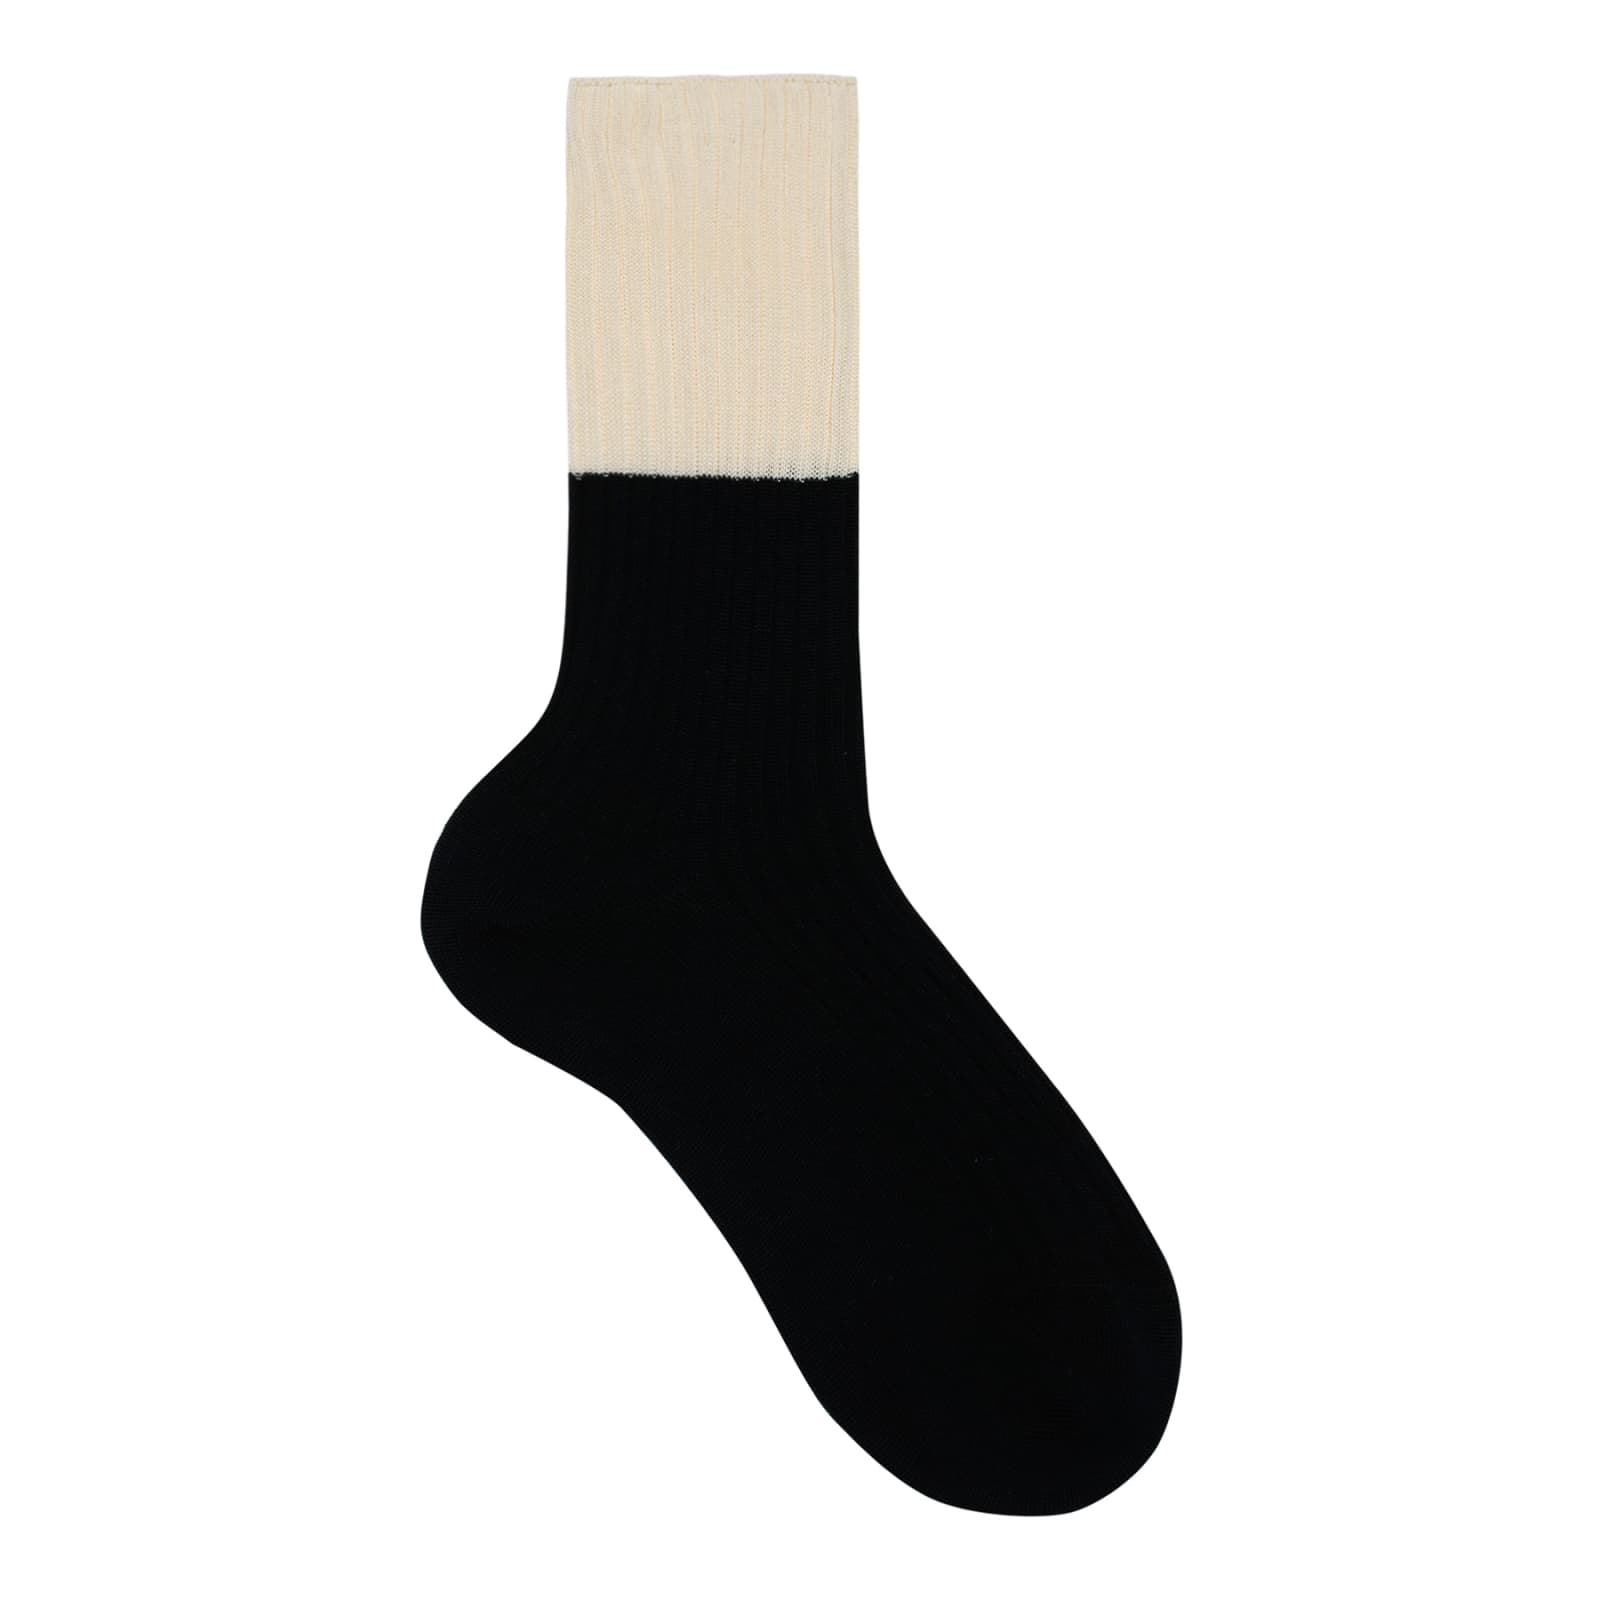 Sofie dHoore Two-tone Cotton Socks